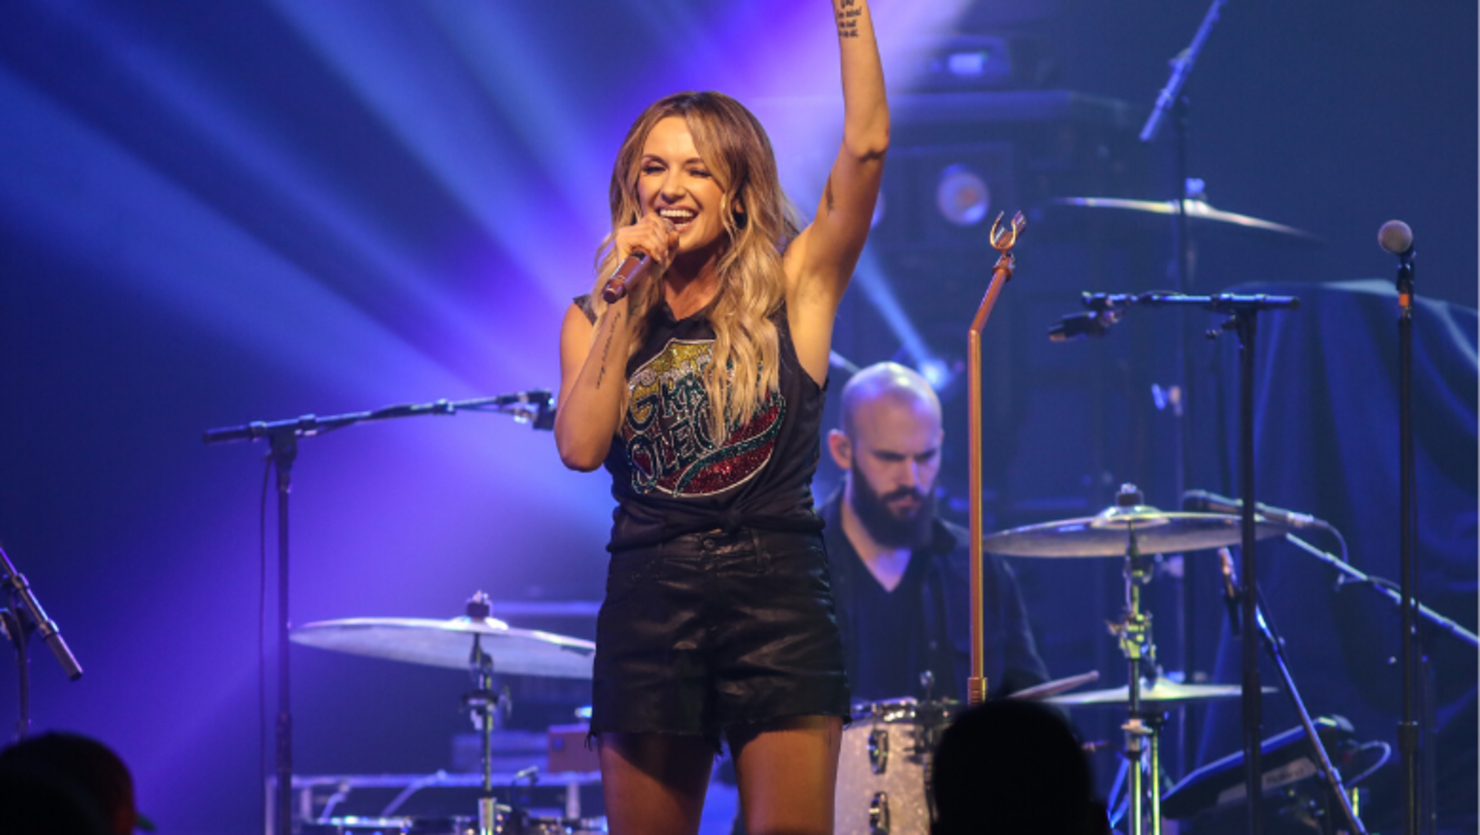 Carly Pearce Is Back In The Studio: 'Pouring My Heart Into These New Songs'